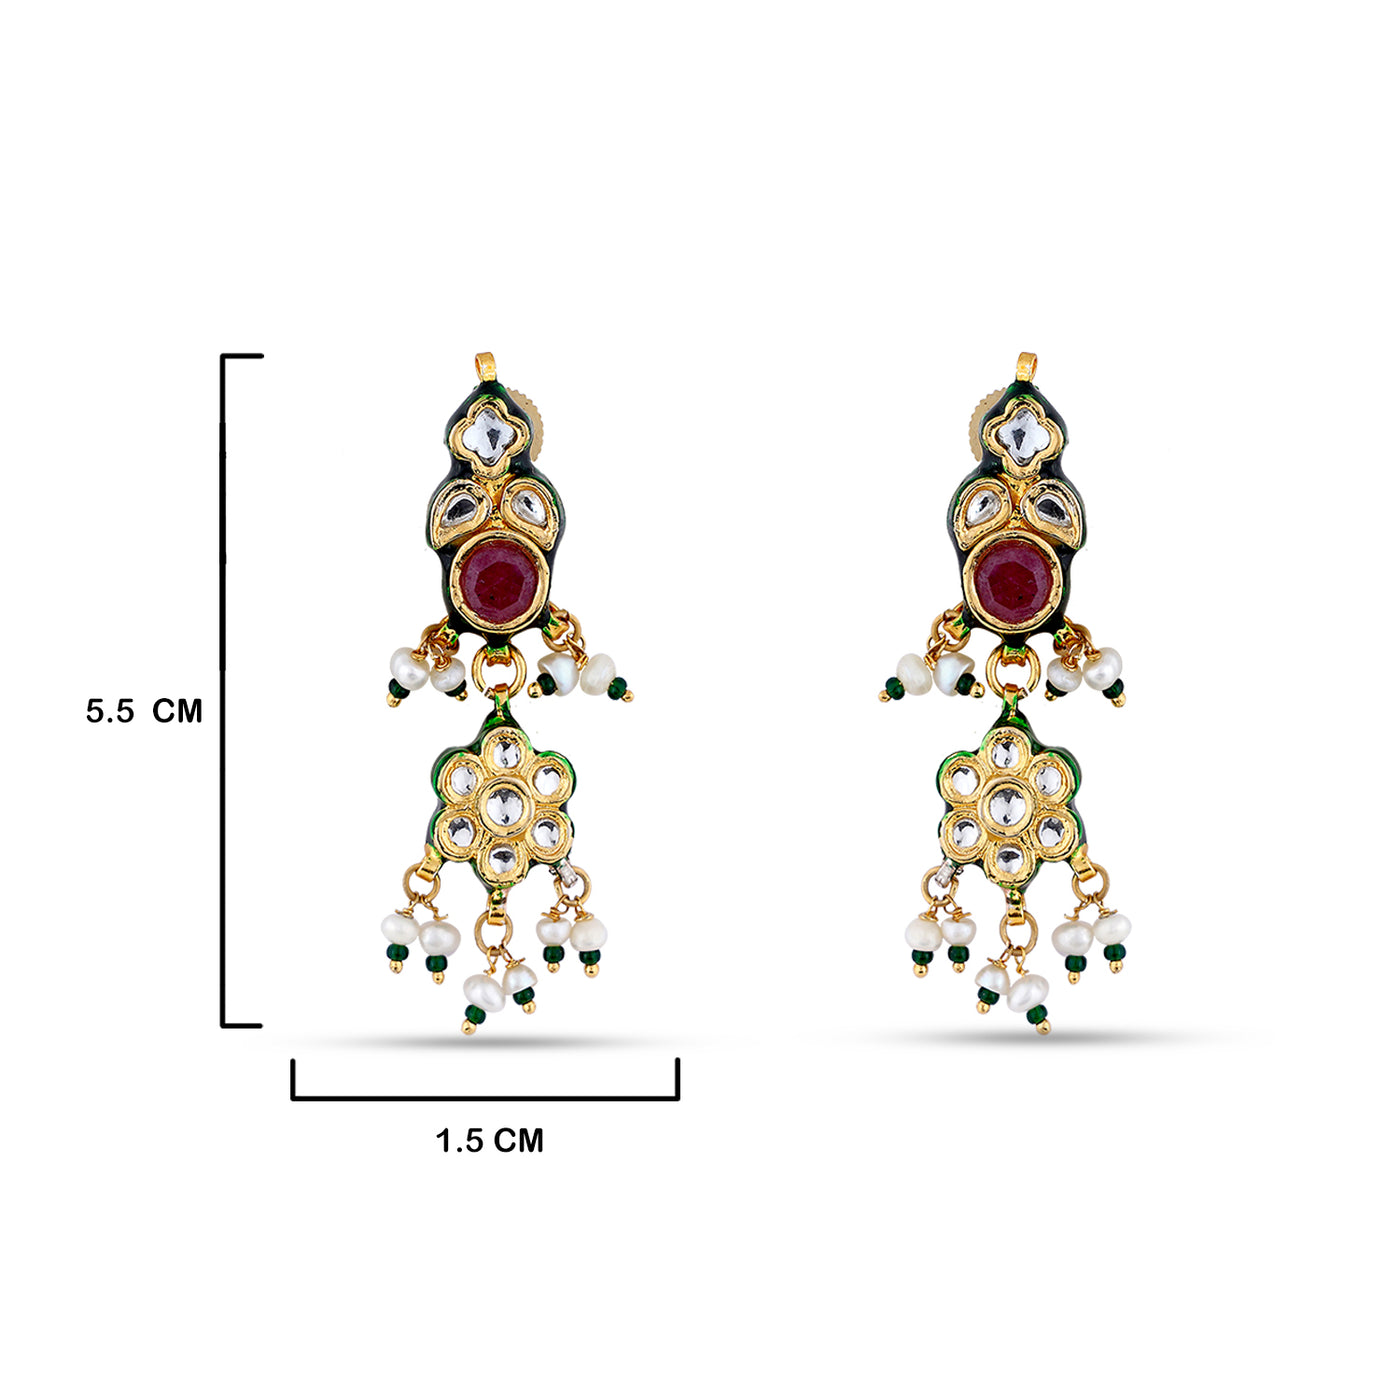 Red Stone Centred Meenakari Earrings with measurements in mc. 5.5cm by 1.5cm.